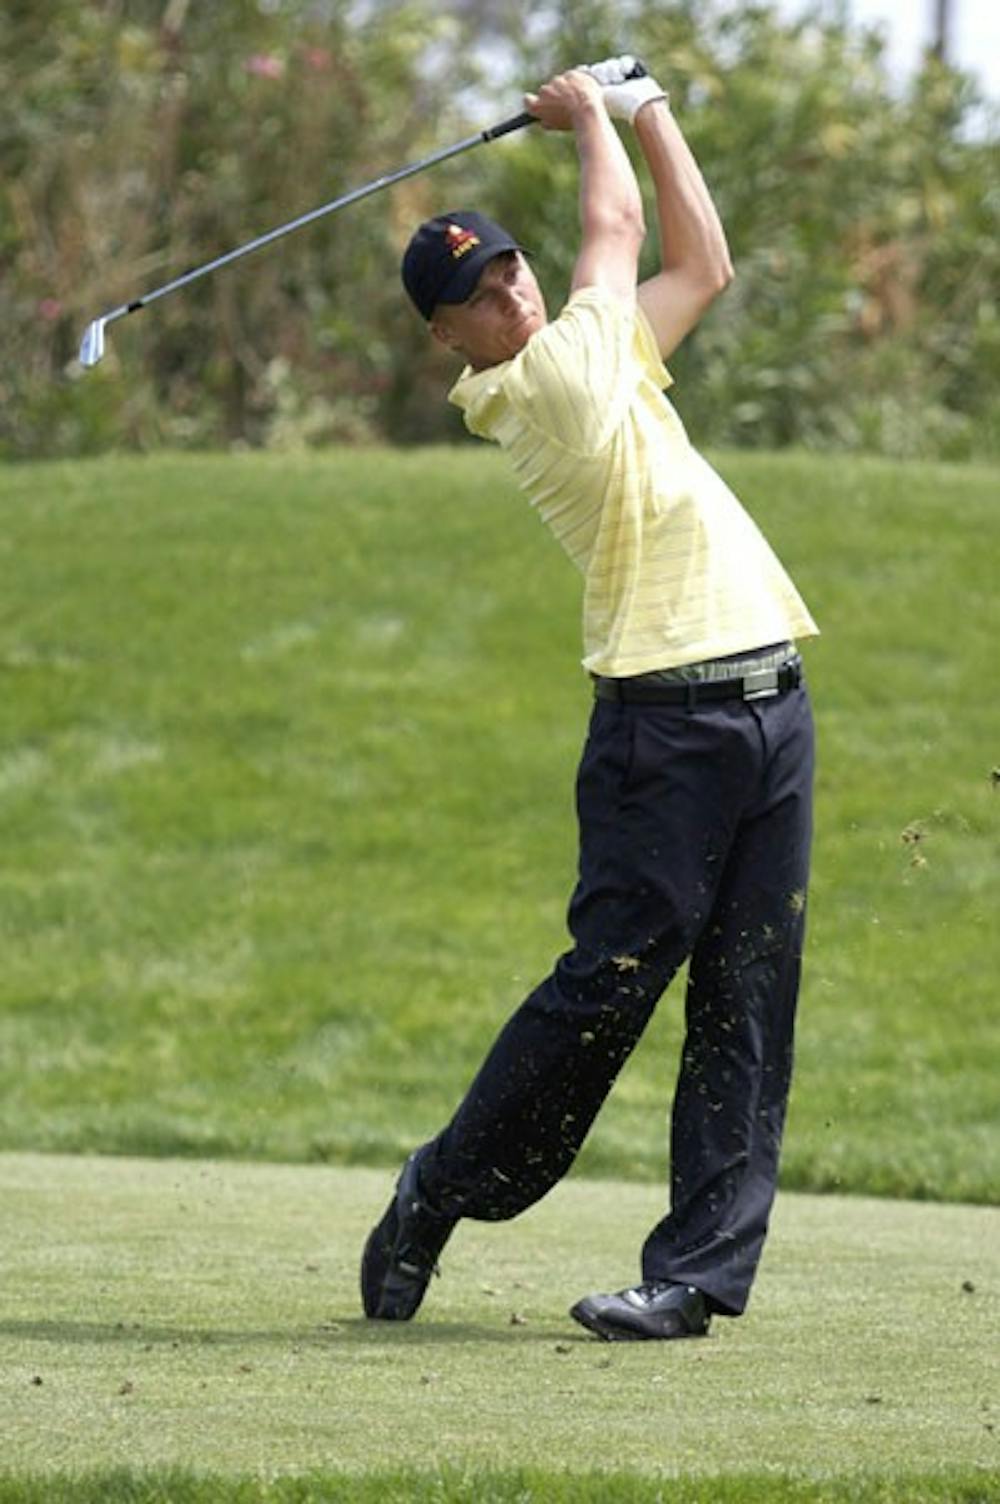 HANGING TOUGH: Junior Scott Pinckney is currently tied for 20th at 3-under at the Pac-10 Championships after shooting a 1-under 71 in the second round. ASU currently sits in second place at 22-under after the first two rounds, 13 strokes behind Stanford. (Photo by Scott Stuk)